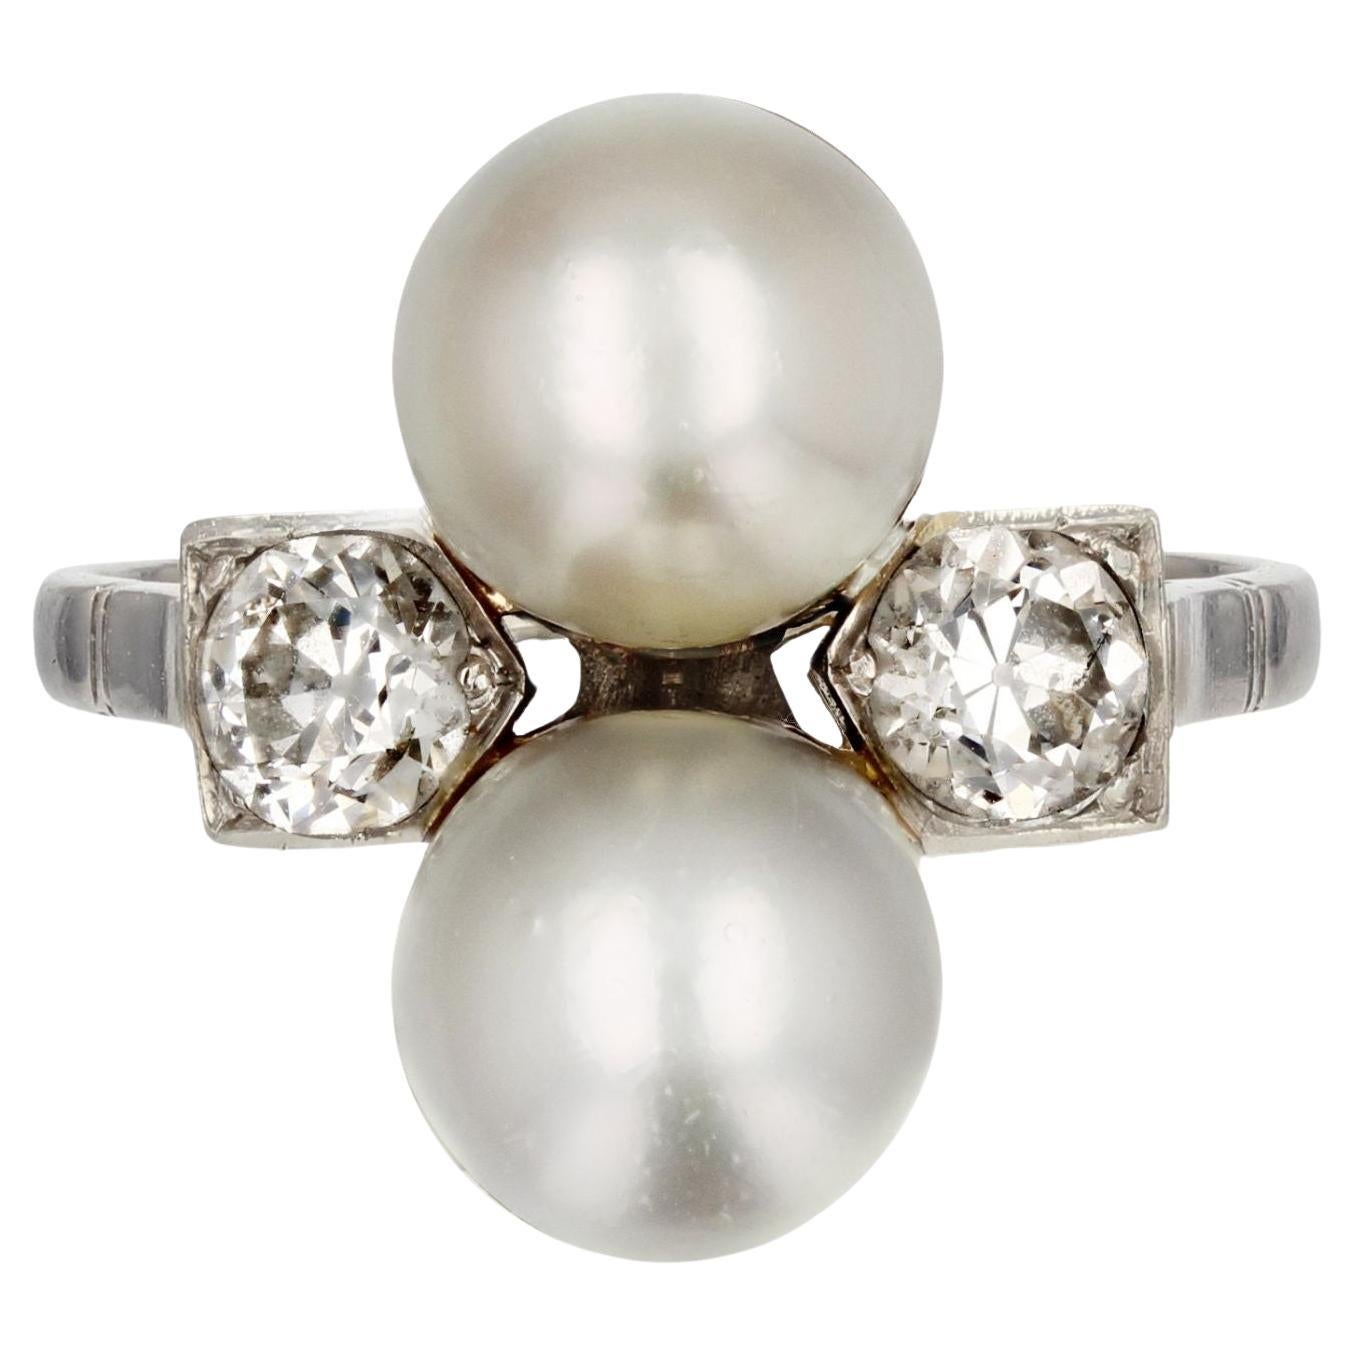 French 1925s Art Deco Fine Pearl Diamond Platinum You and Me Ring